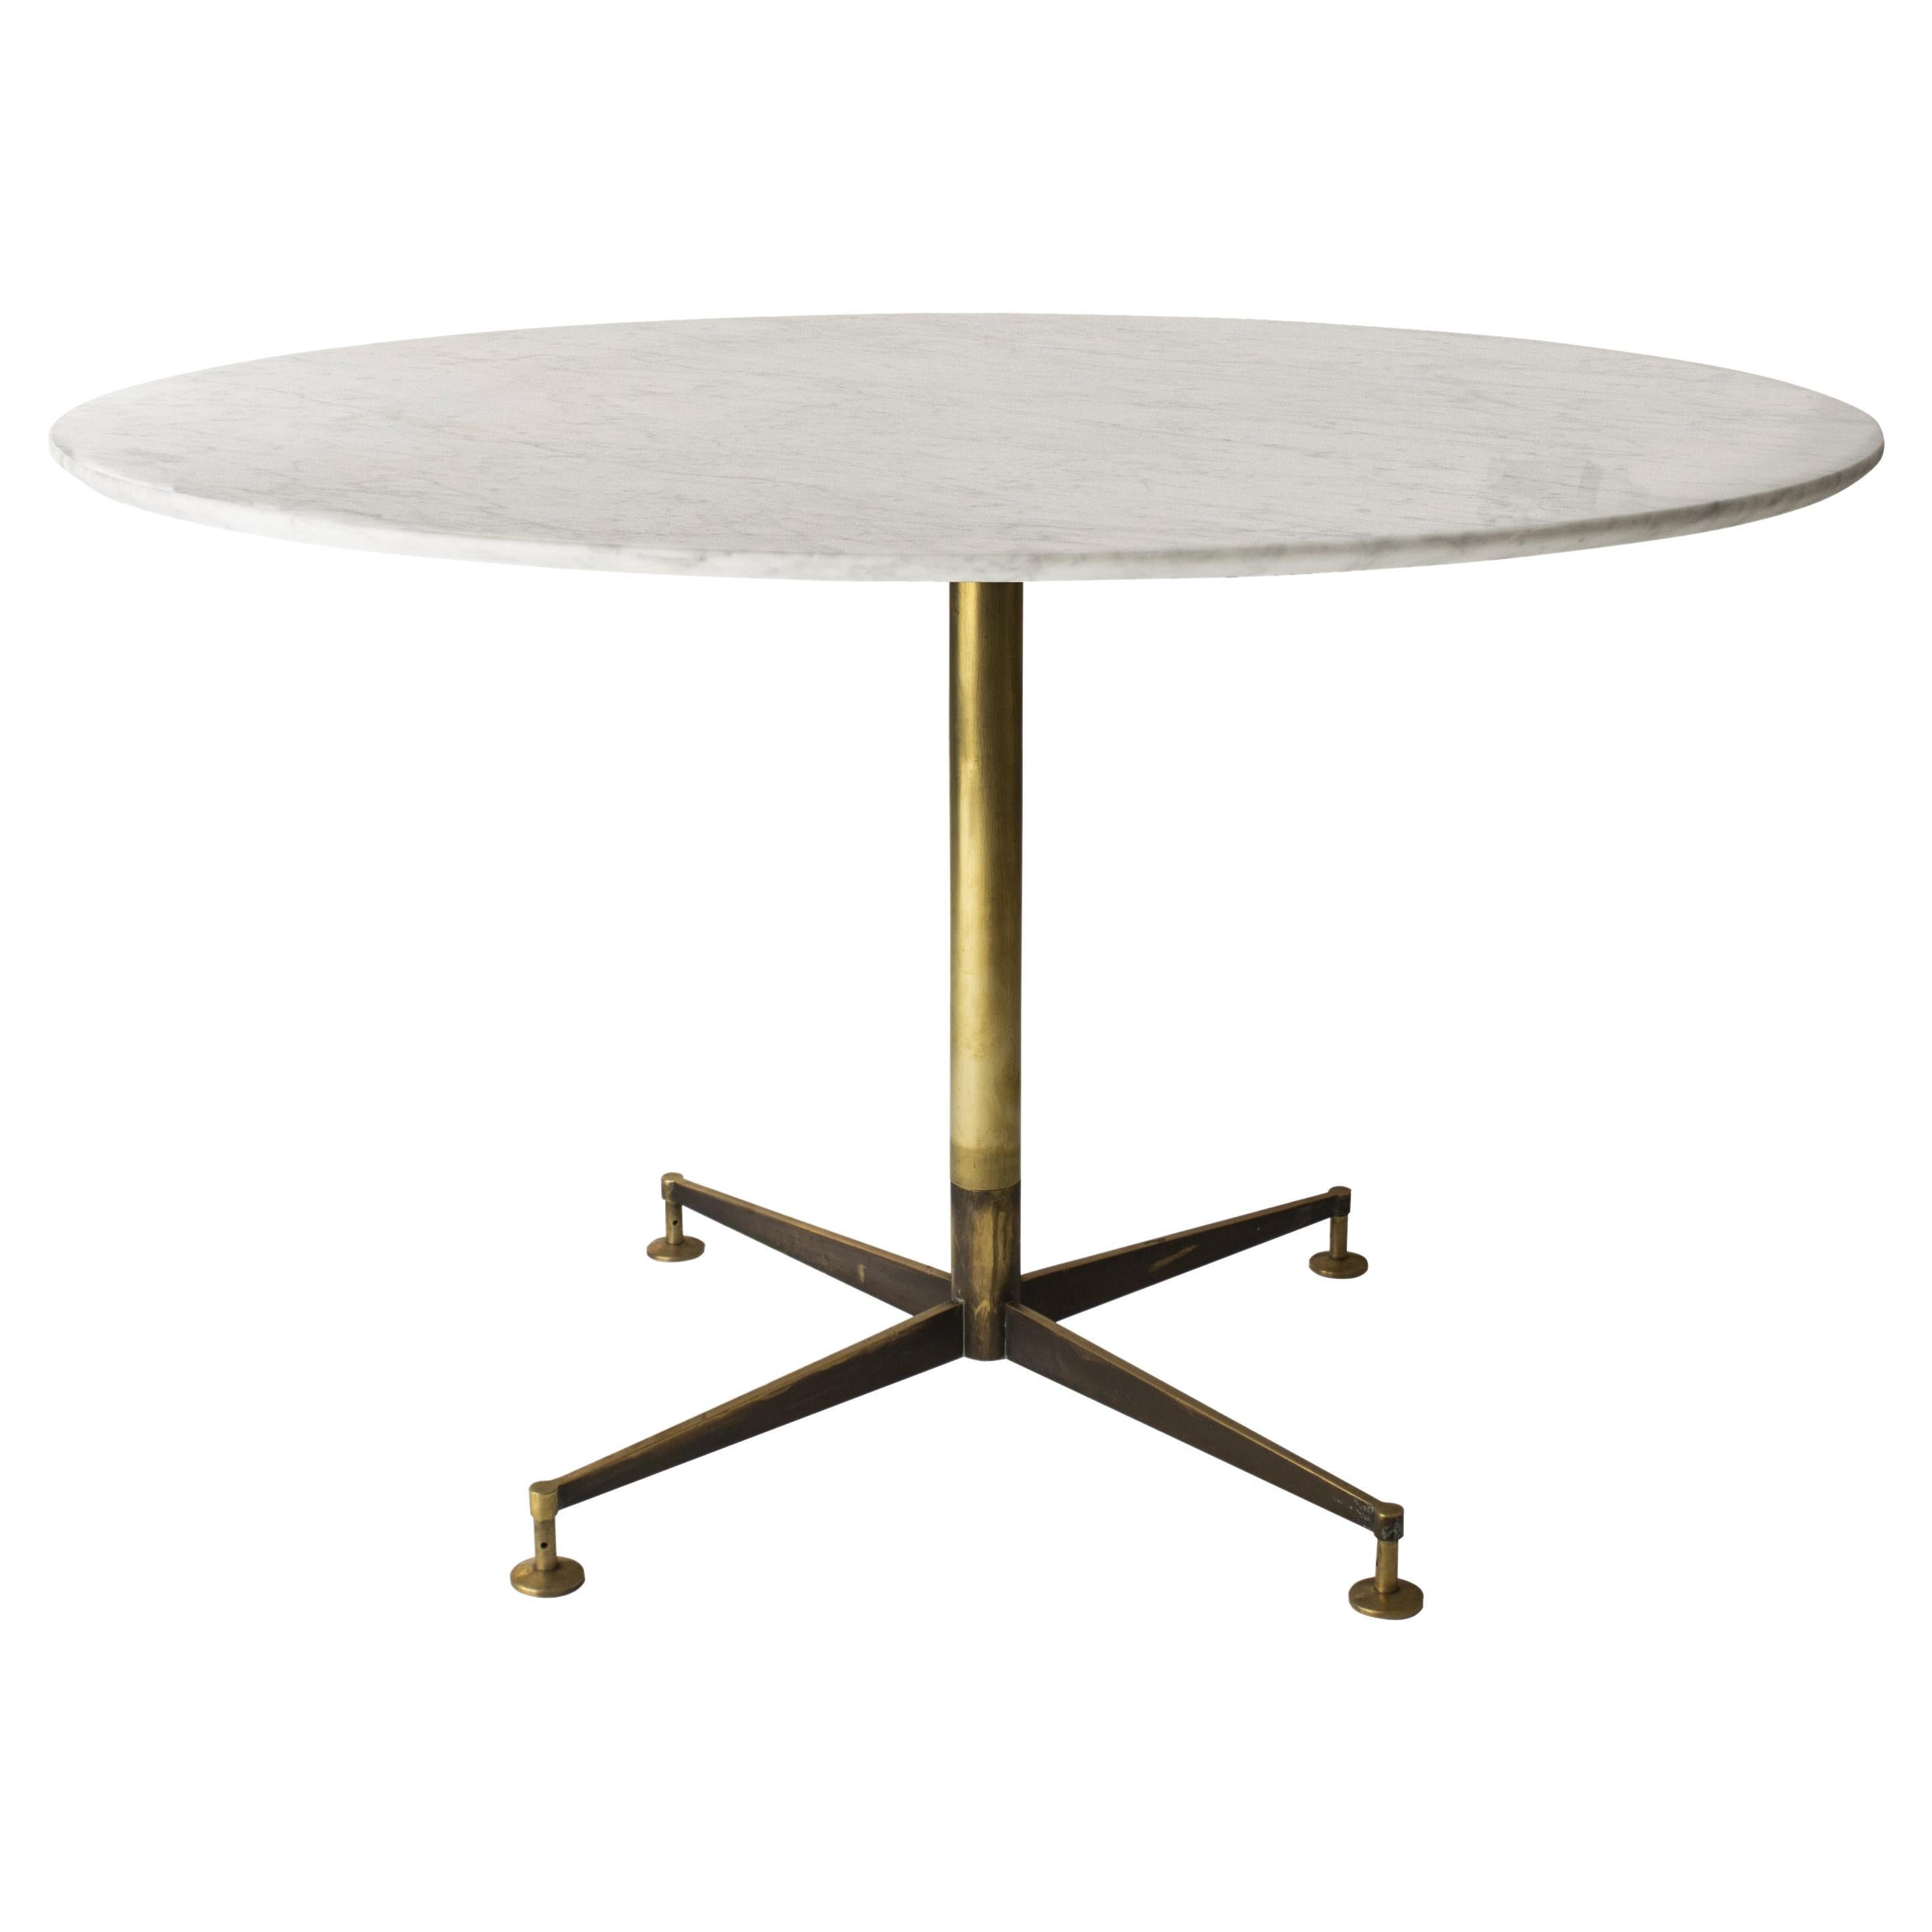 MidCentury Modern 120cm Carrara Marble Dining Table with Brass Foot, Italy, 1950